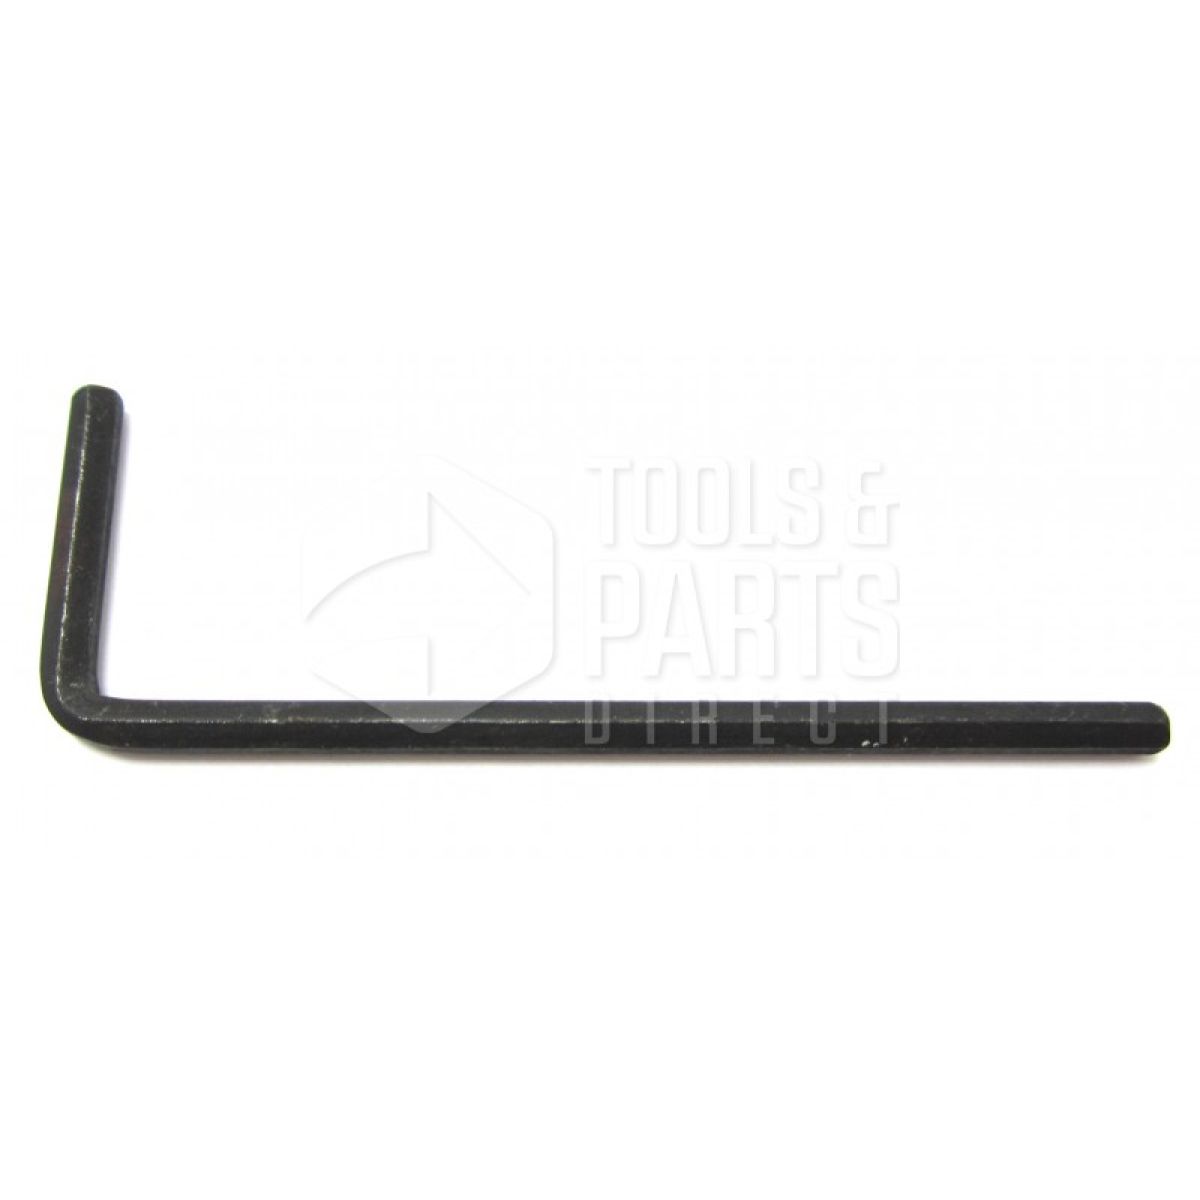 Black & Decker Gl652 String Trimmer (type 1) Spare Parts SPARE_GL652/TYPE_1  from Spare Parts World